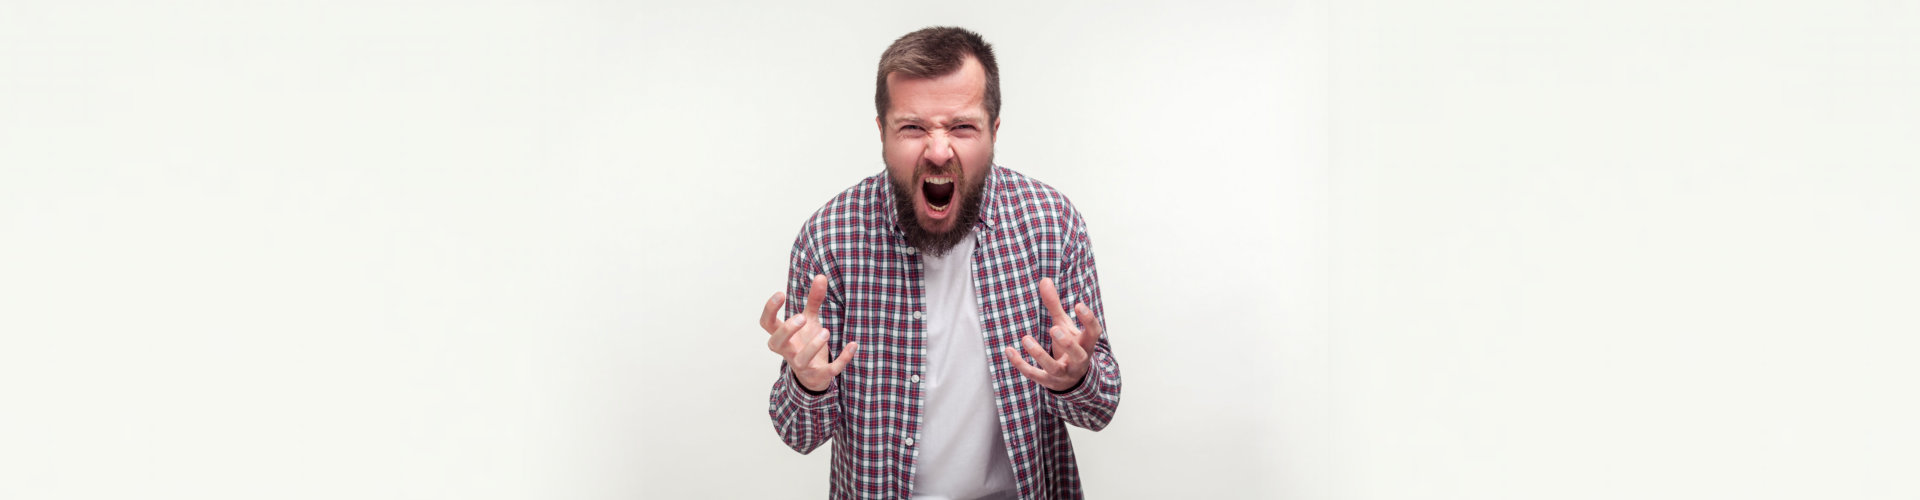 Portrait of aggressive bearded young man in plaid shirt standing with furious face full of hatred and anger, experiencing strong emotions, shouting